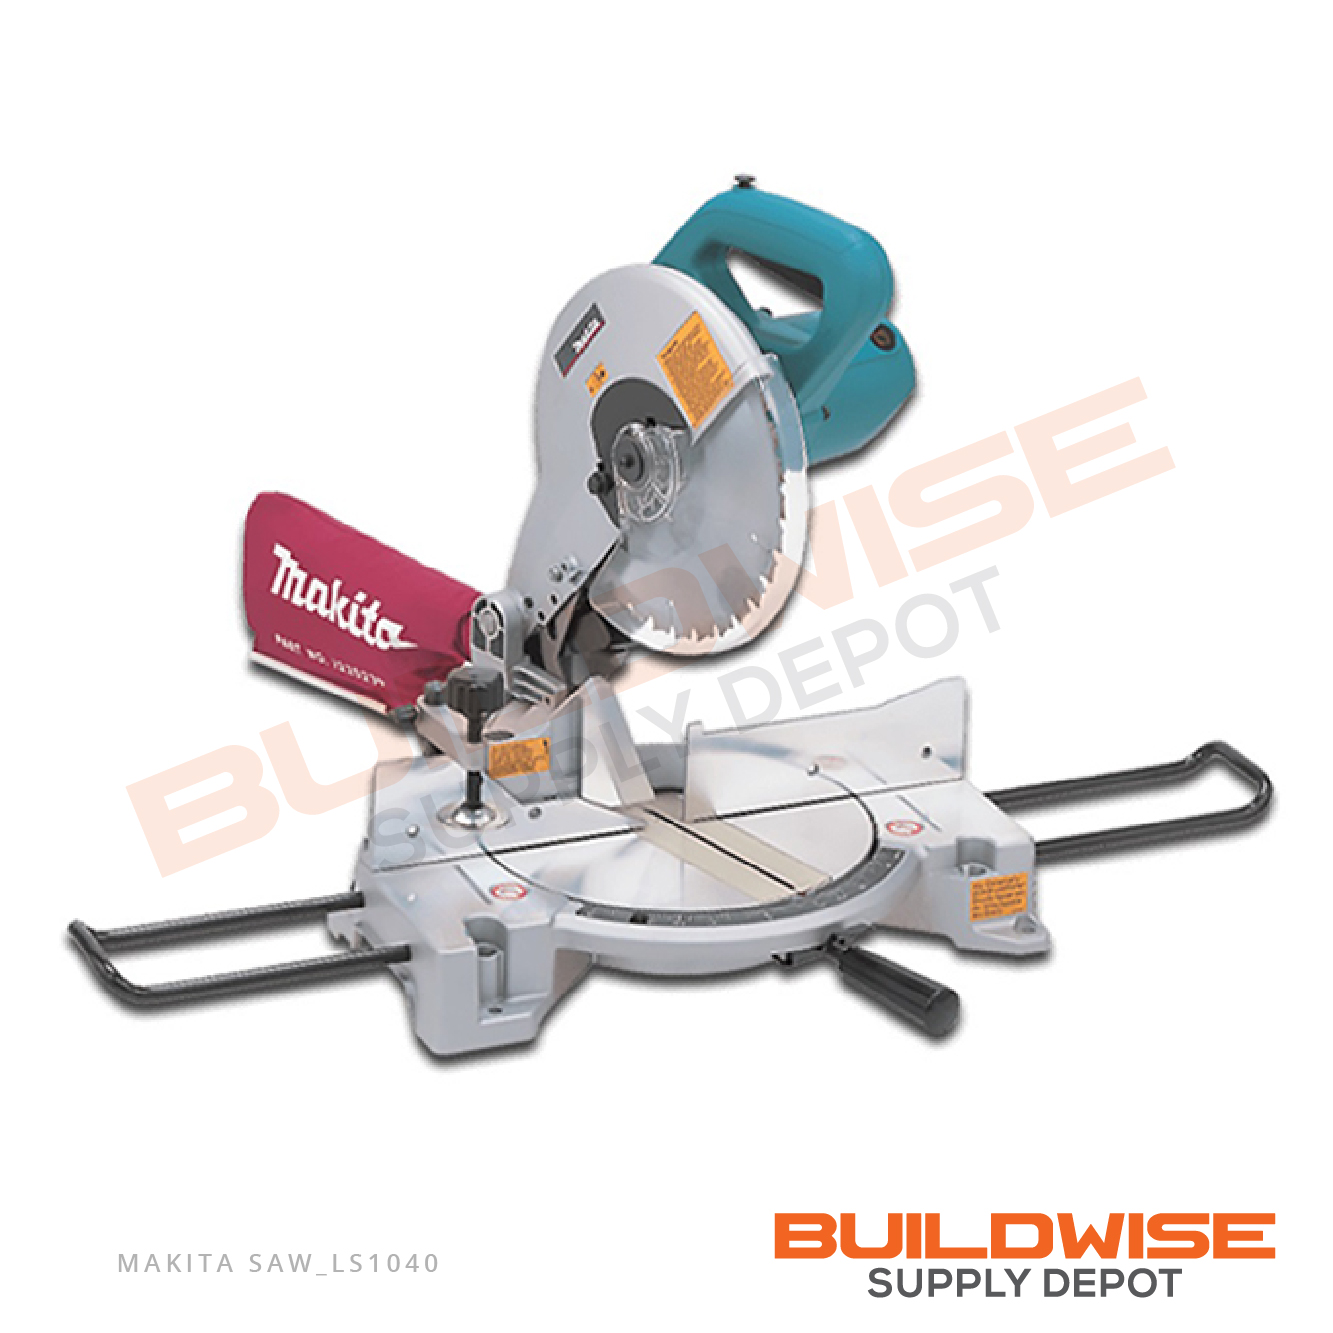 MAKITA COMPOUND MITER SAW LS1040 10" Buildwise